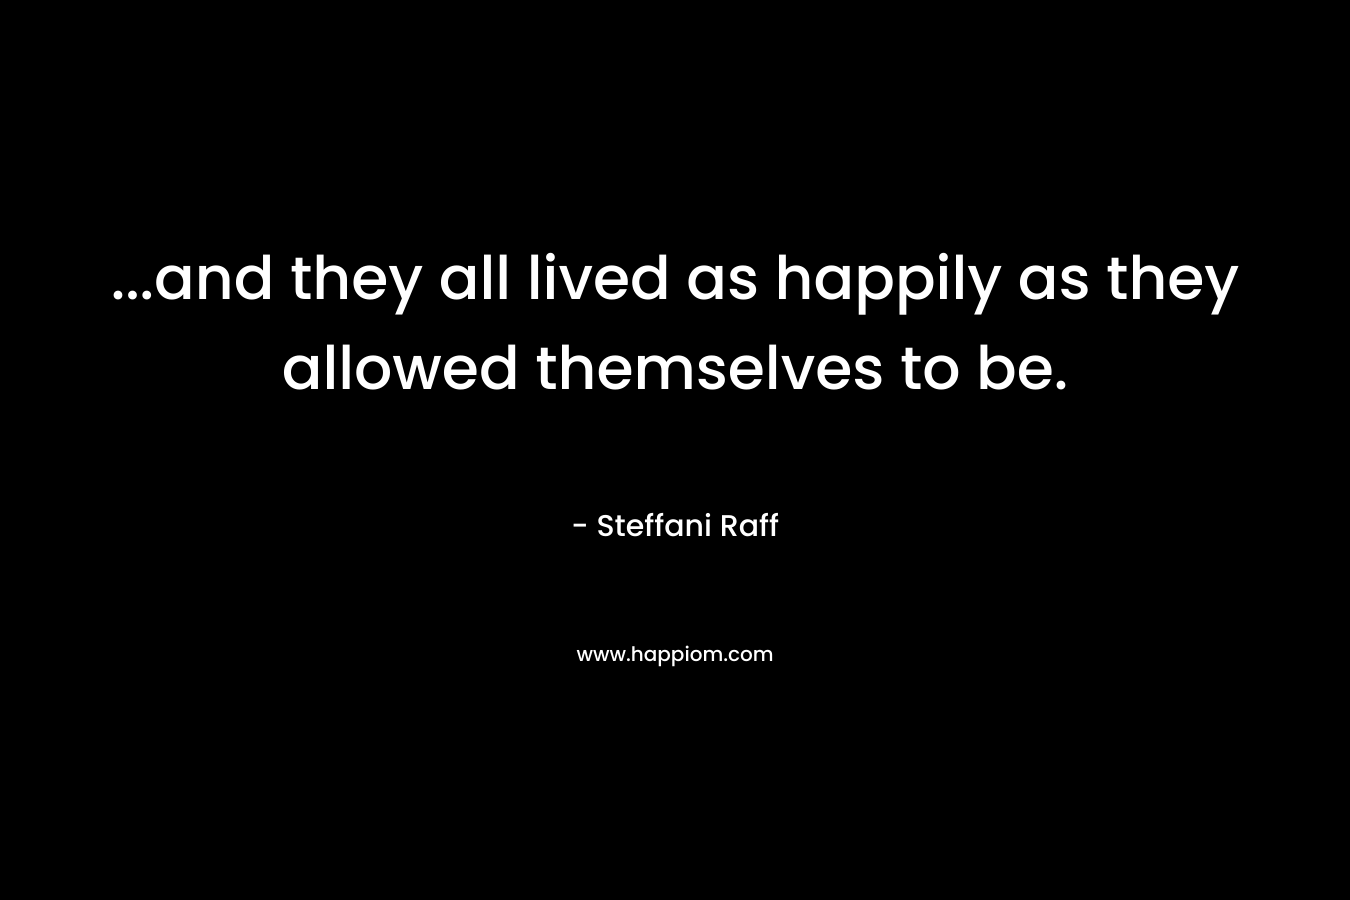 ...and they all lived as happily as they allowed themselves to be.